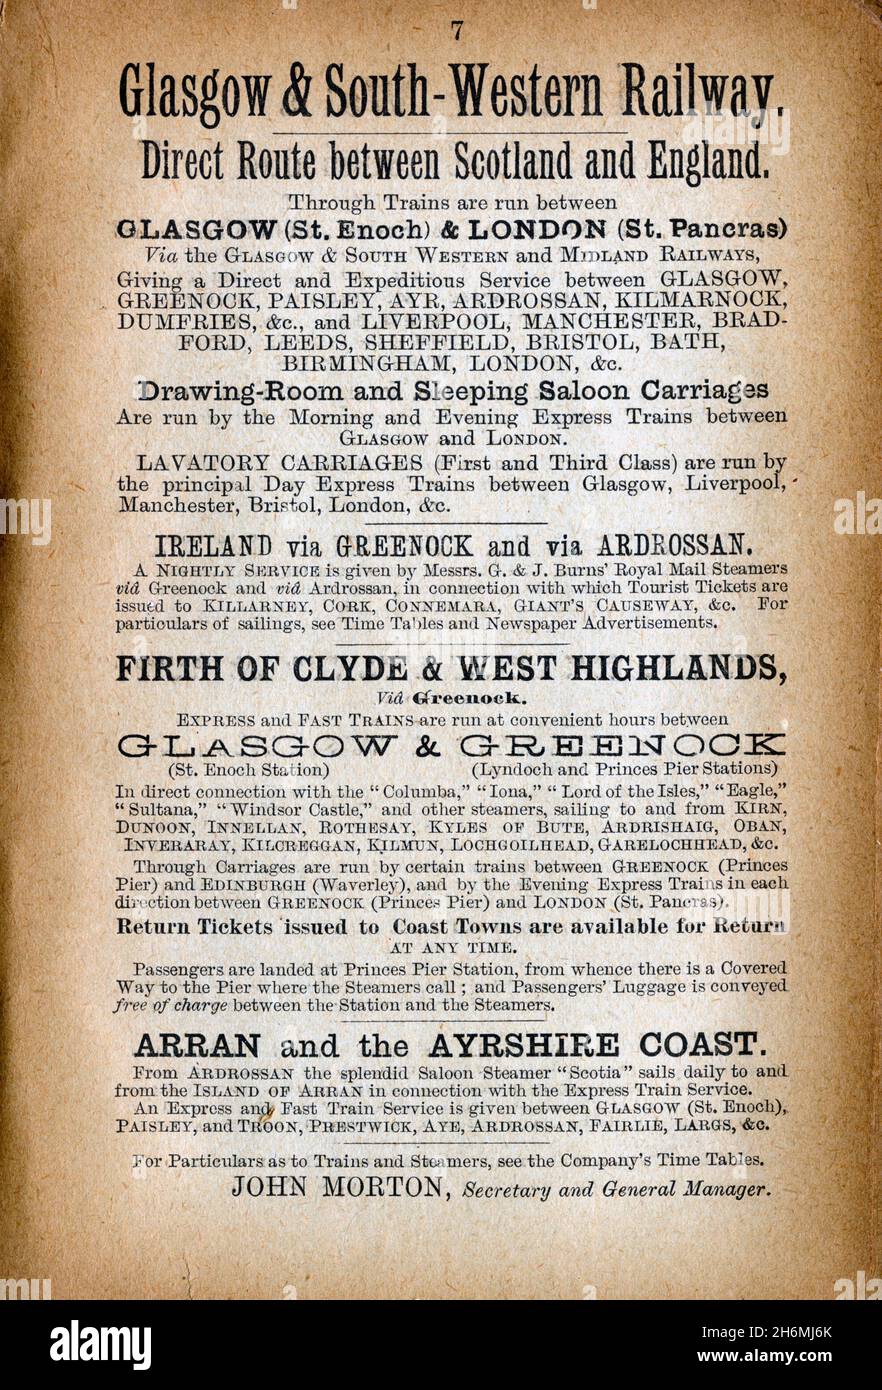 Vintage advertisement page from an 1889 Baddeley's Thorough Guide to the English Lake District.  Featuring the Glasgow & South-Western Railway. Stock Photo